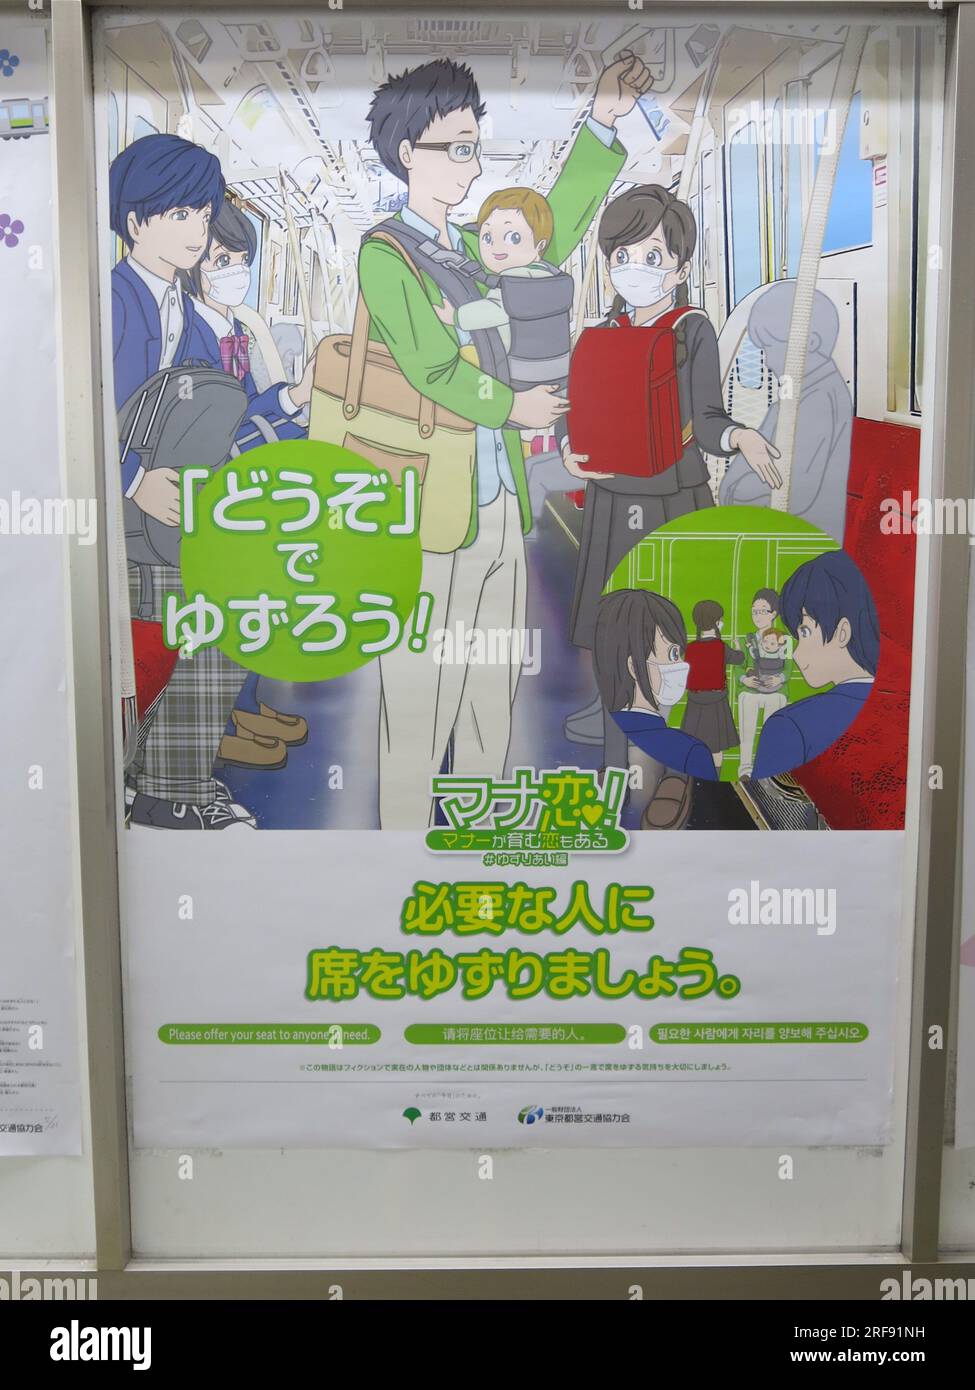 A public information poster on the Tokyo Metro promoting the giving-up of your seat to others who may need it more. Stock Photo